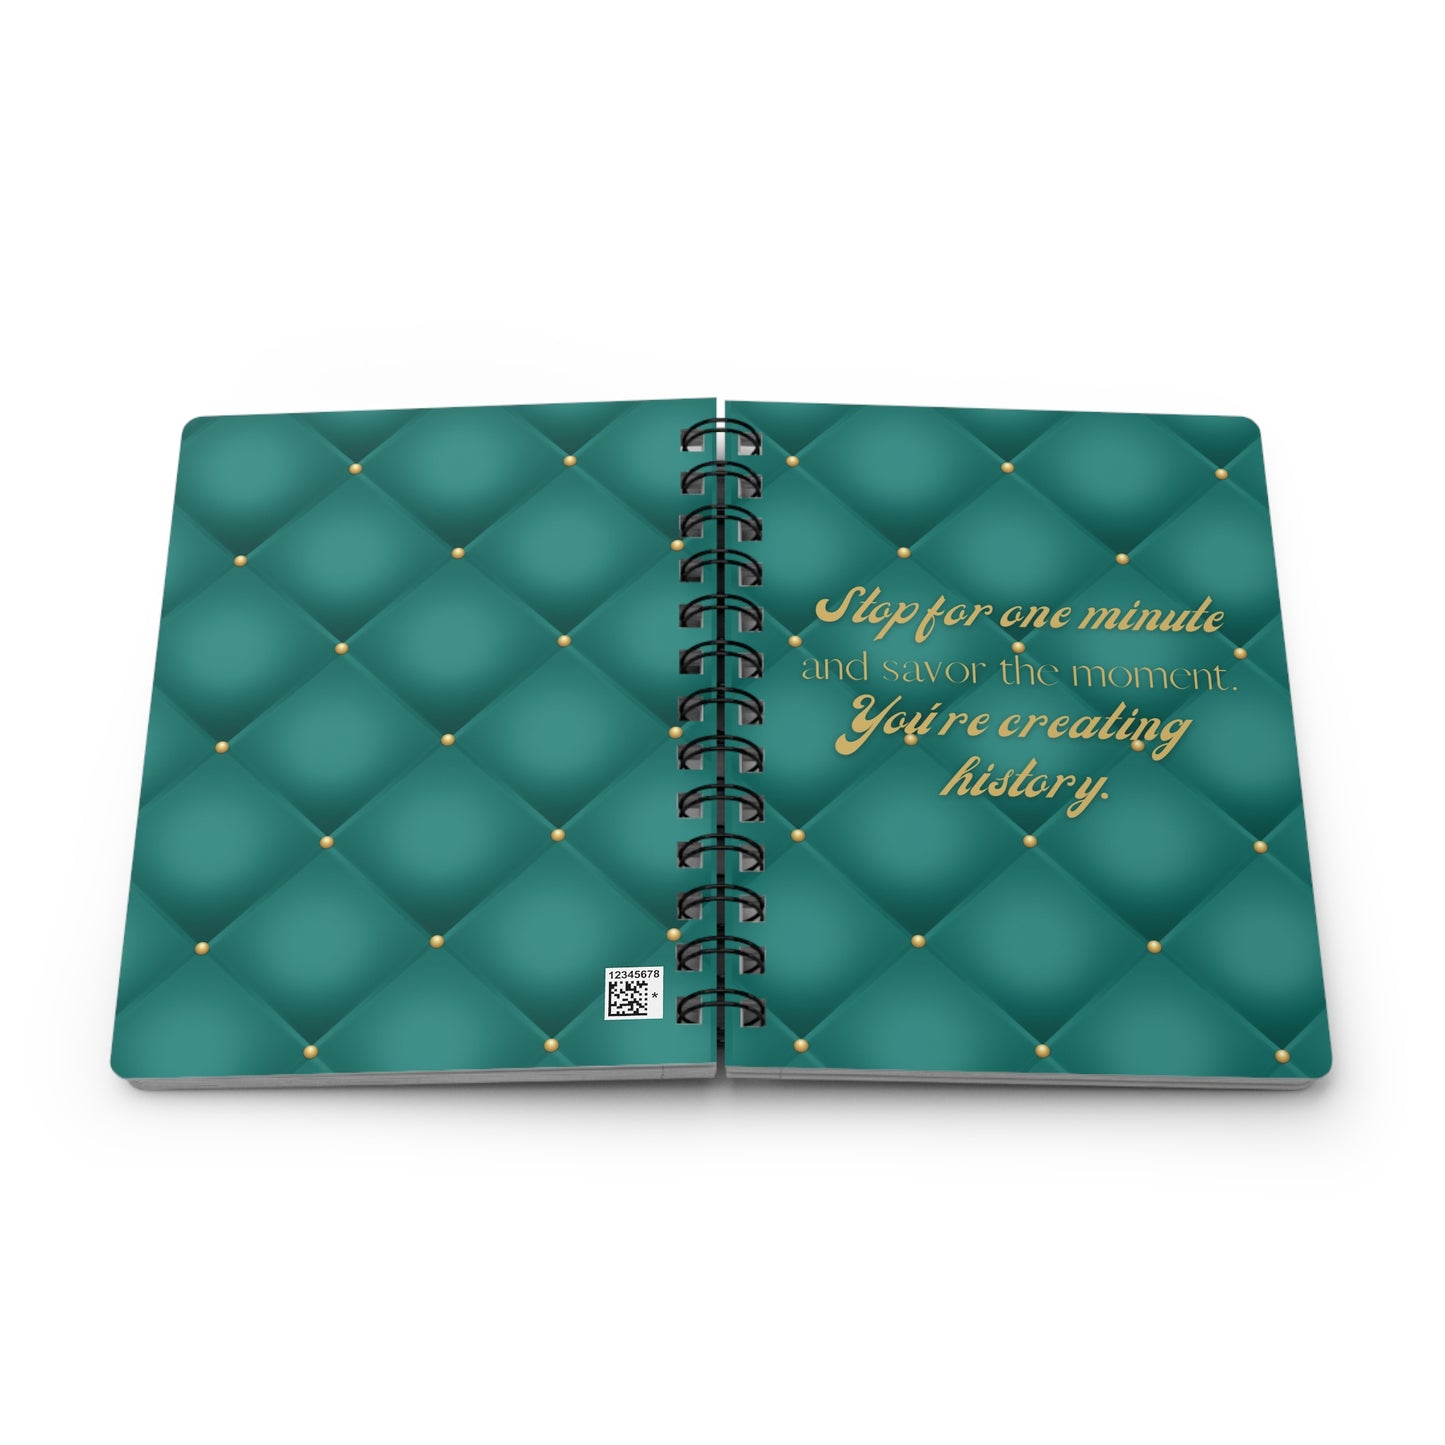 Stop for one minute Tufted Print Turquoise and Gold Spiral Bound Journal